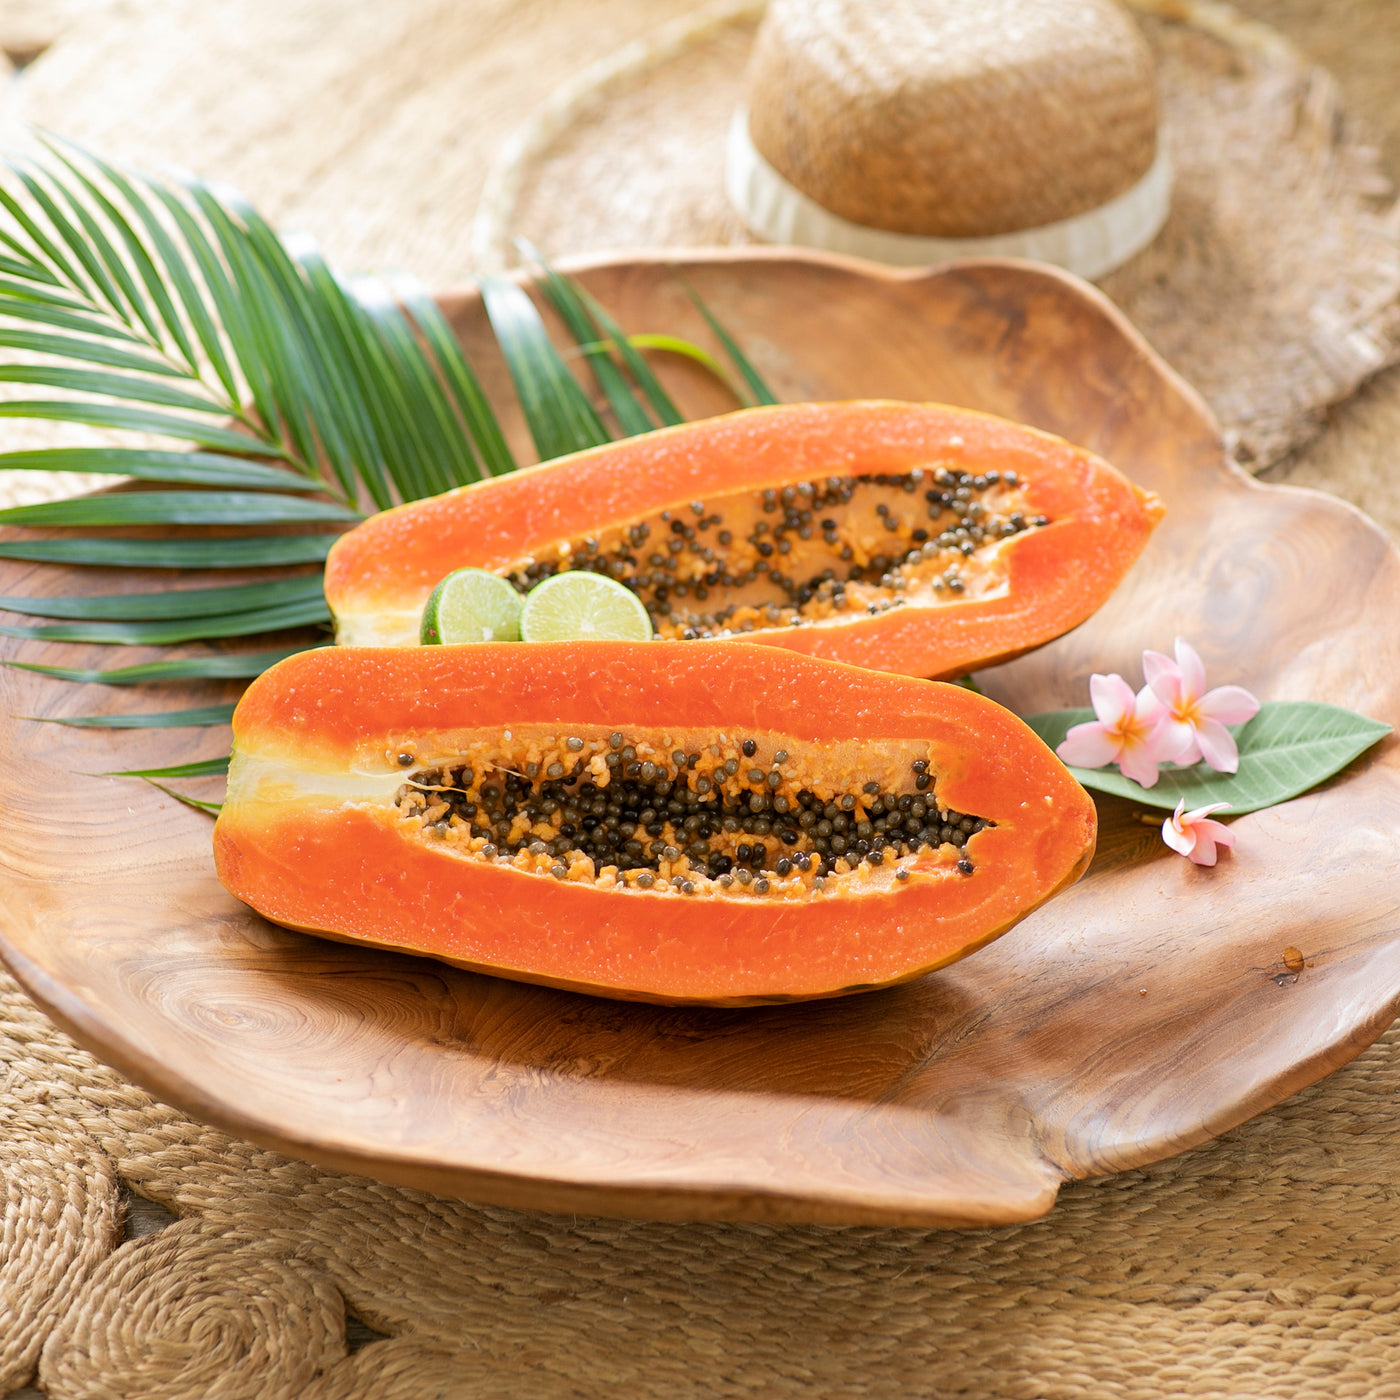 papaya-online-grocery-delivery-singapore-thenewgrocer